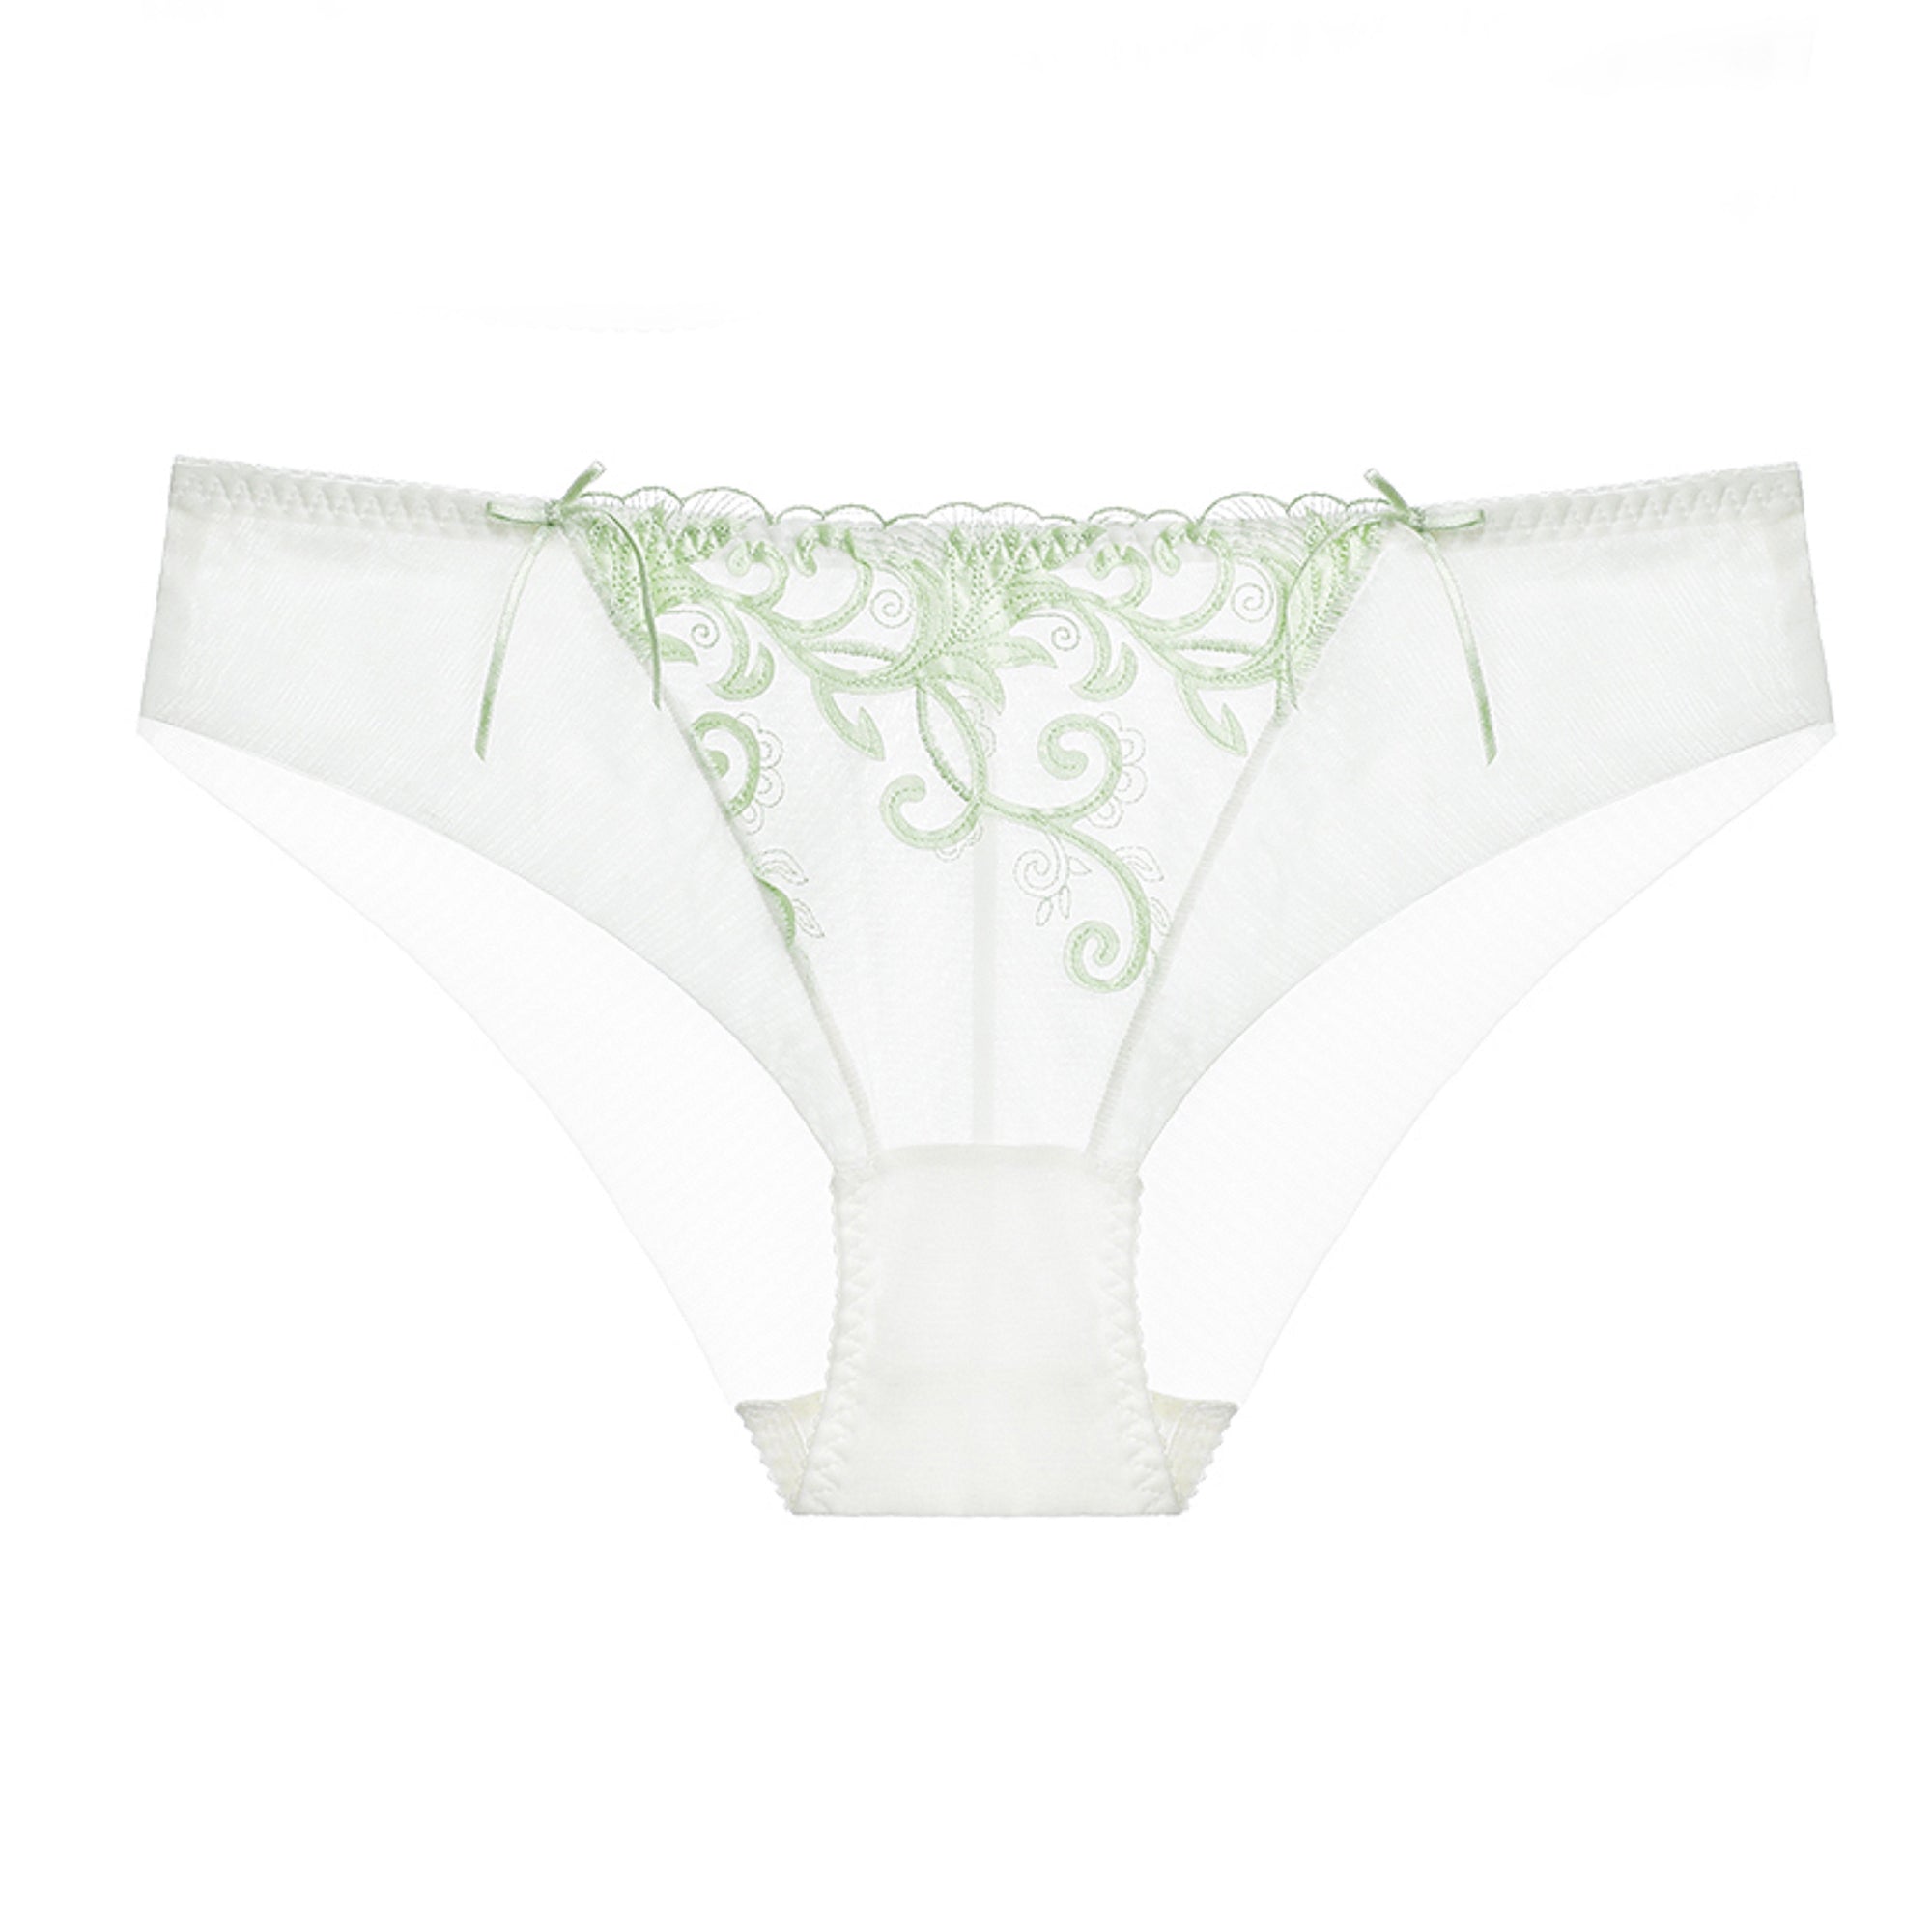 Sexy White Flower Embroidery Lingerie Panty